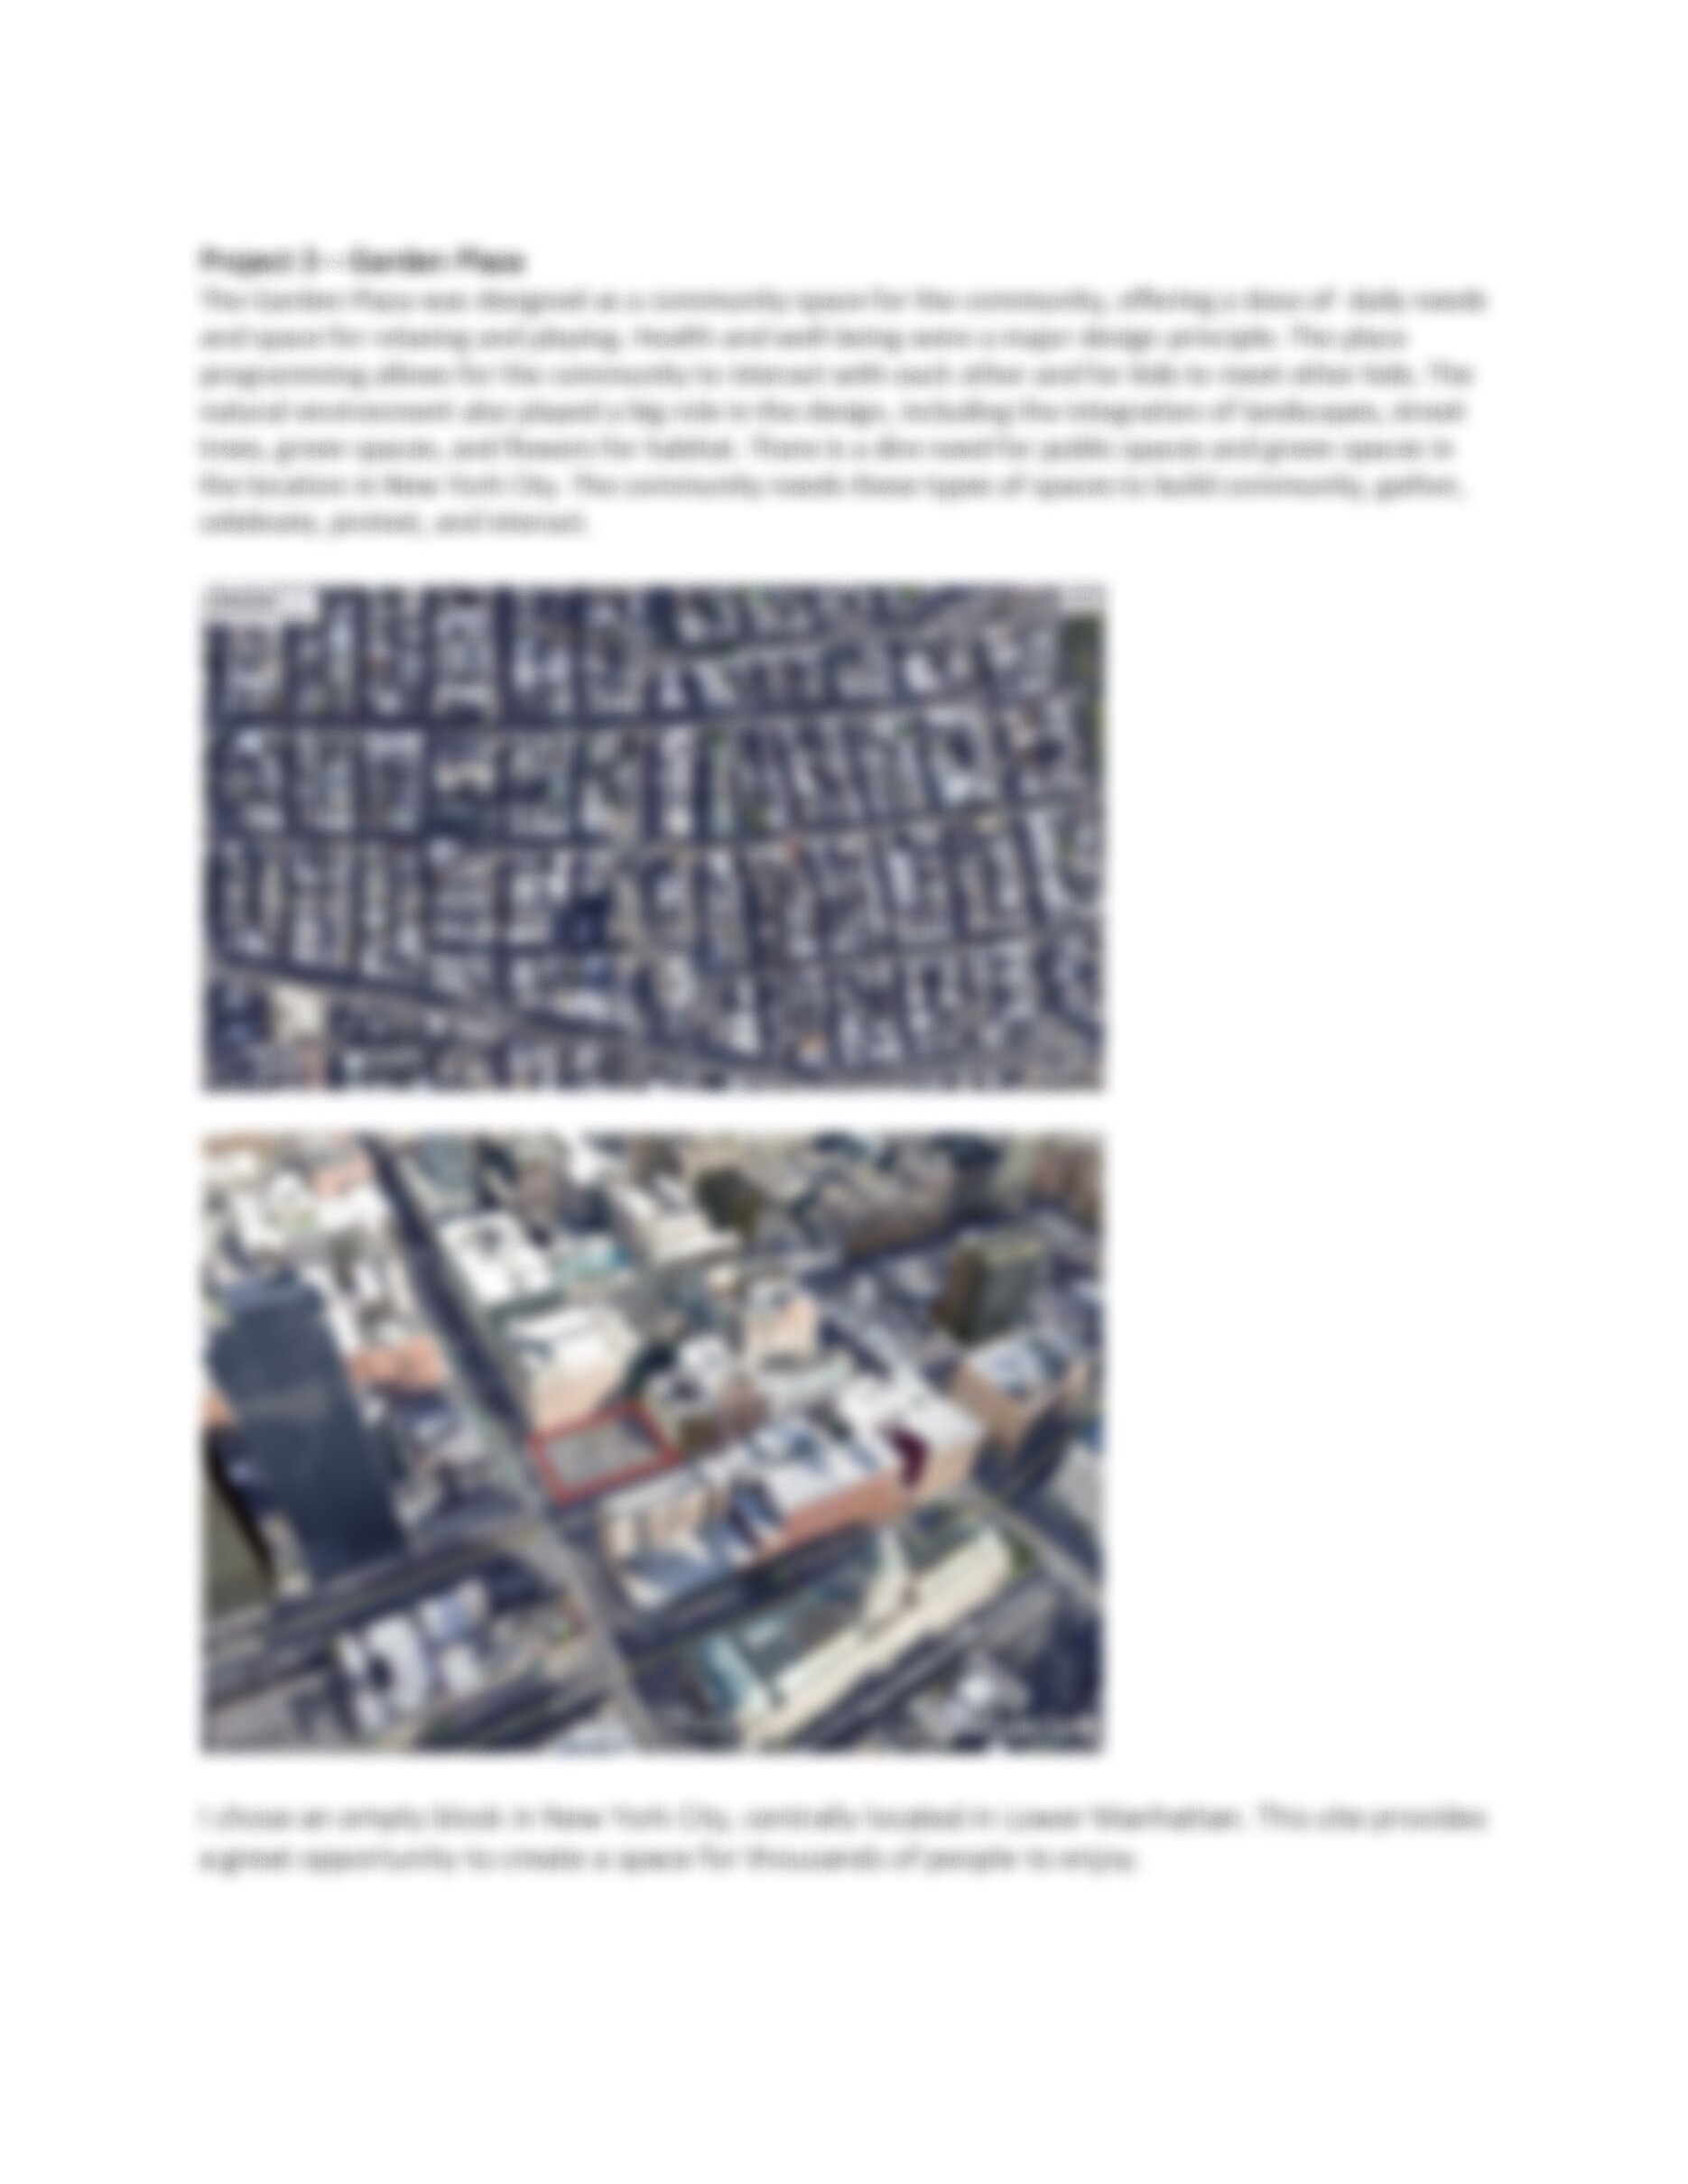 Architectural+Exploration+and+Intervention_Page_10.jpg